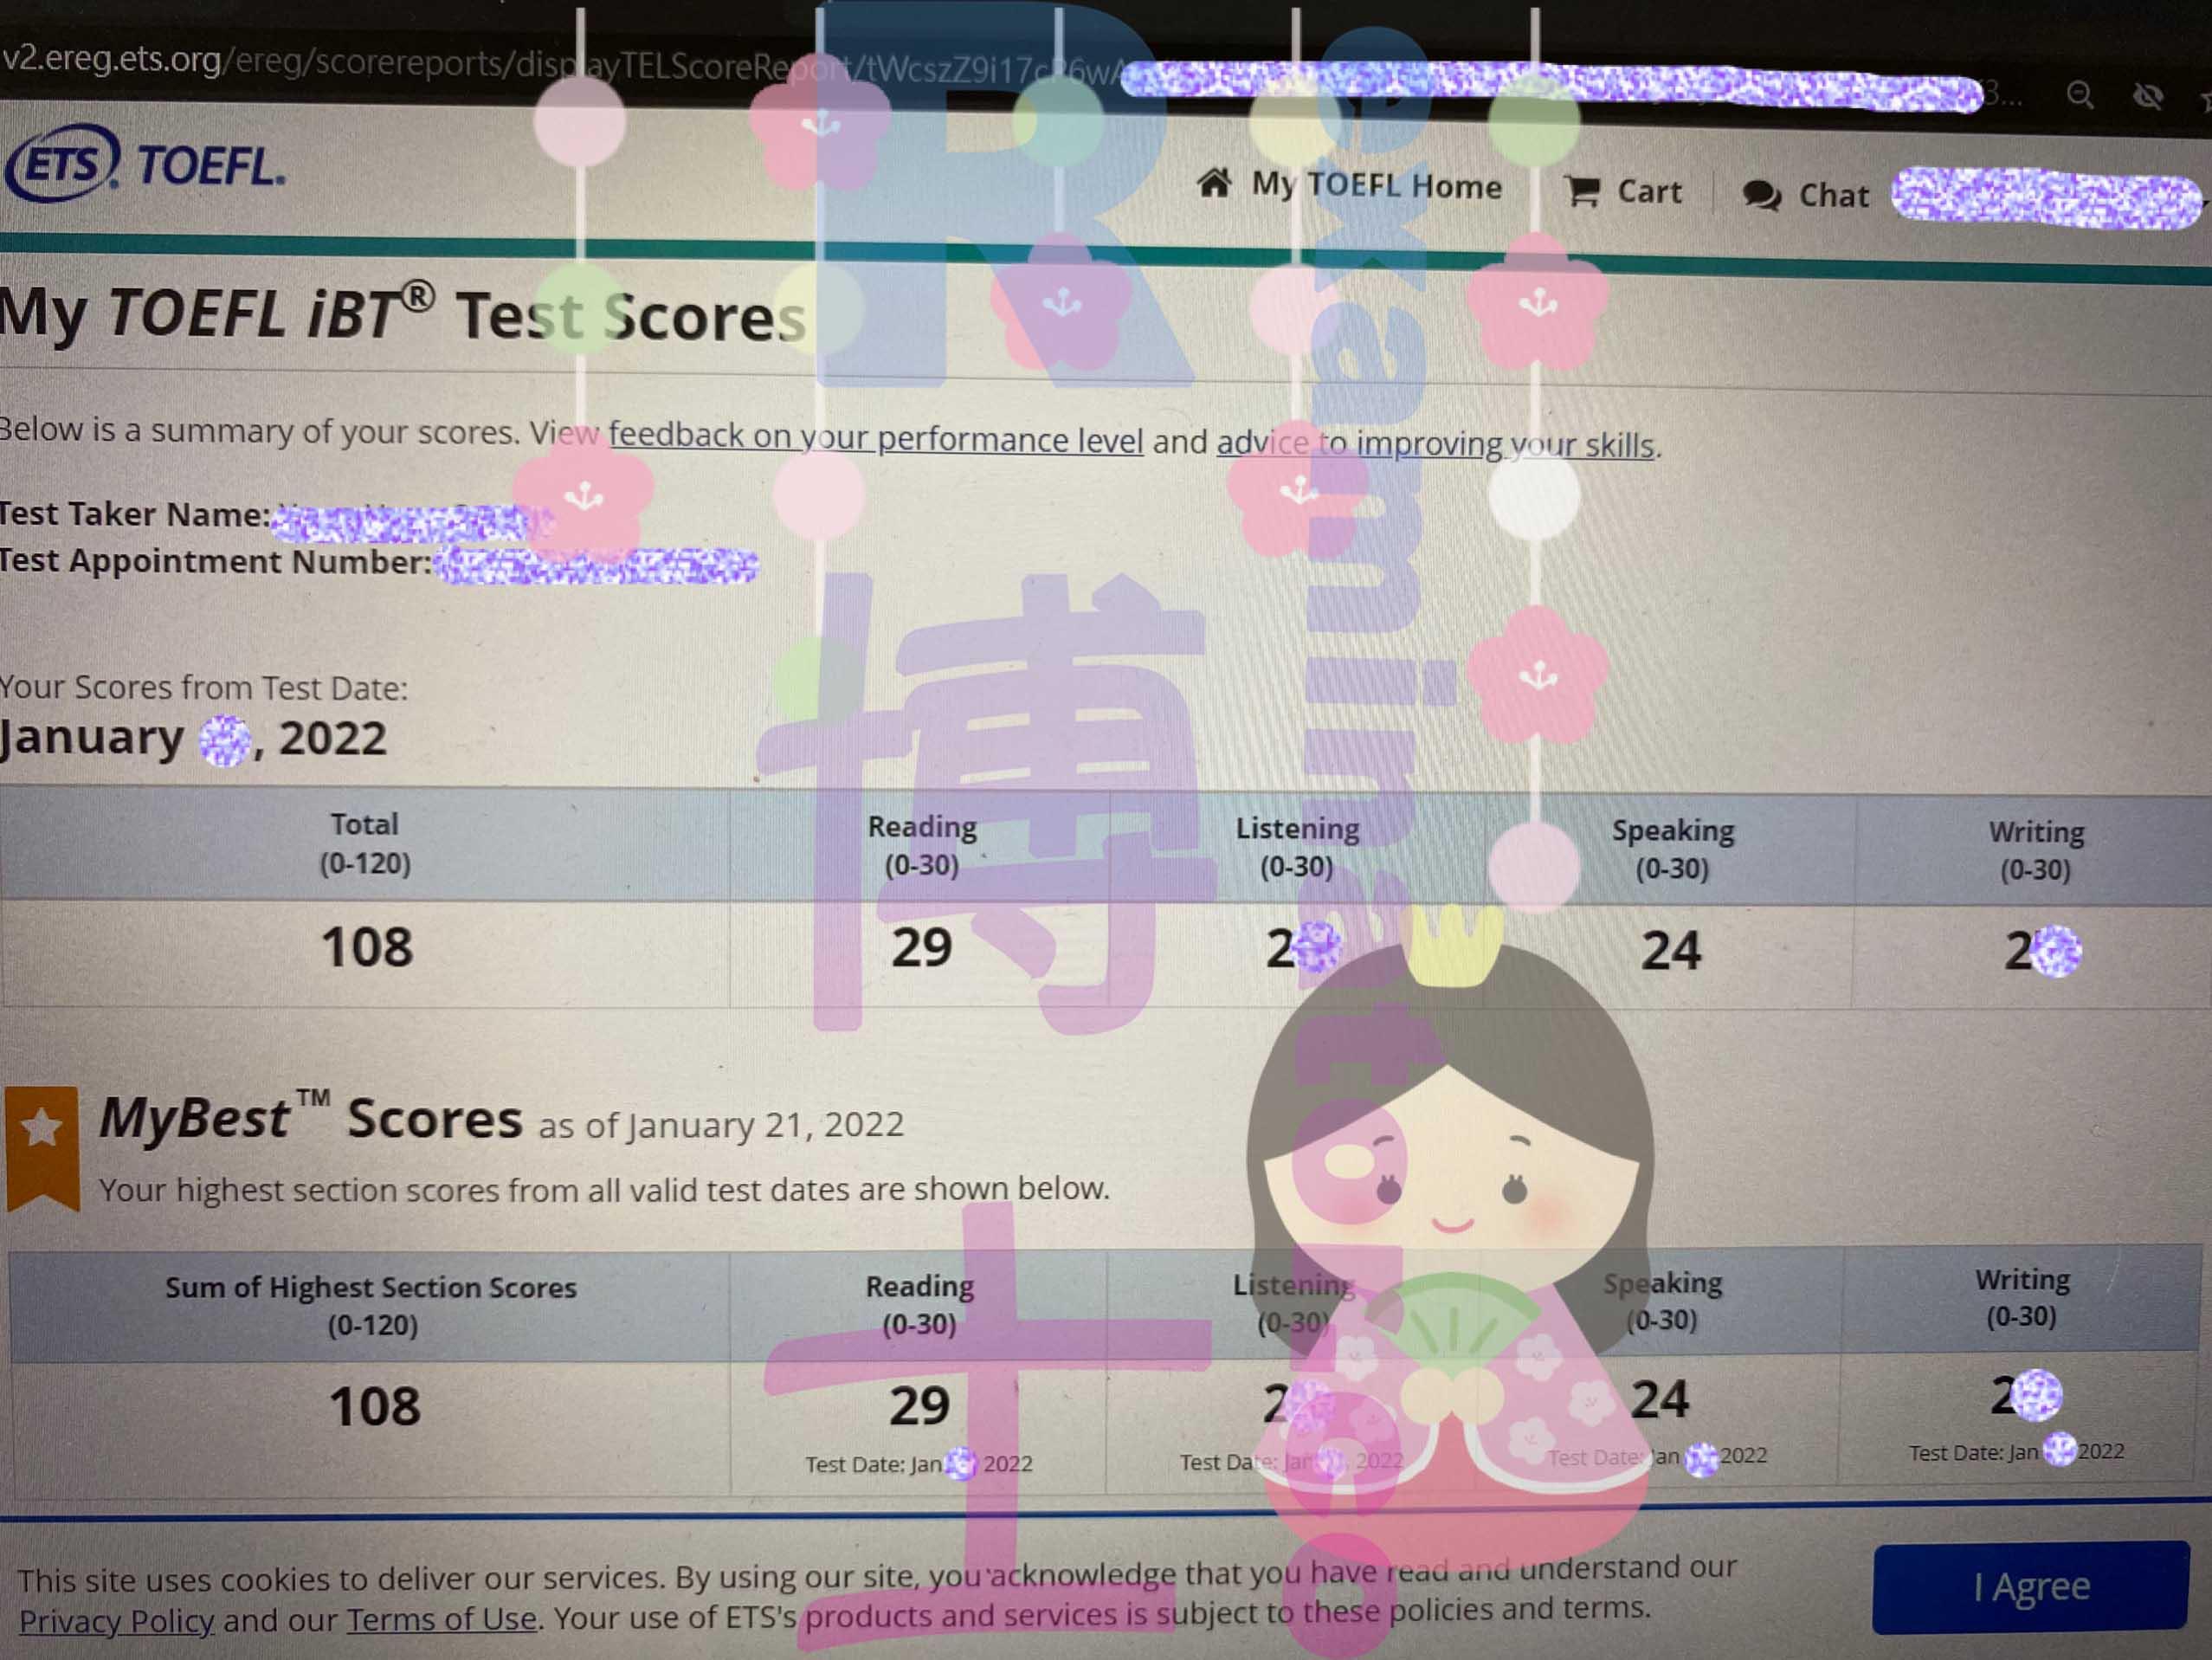 score image for TOEFL Cheating success story #272